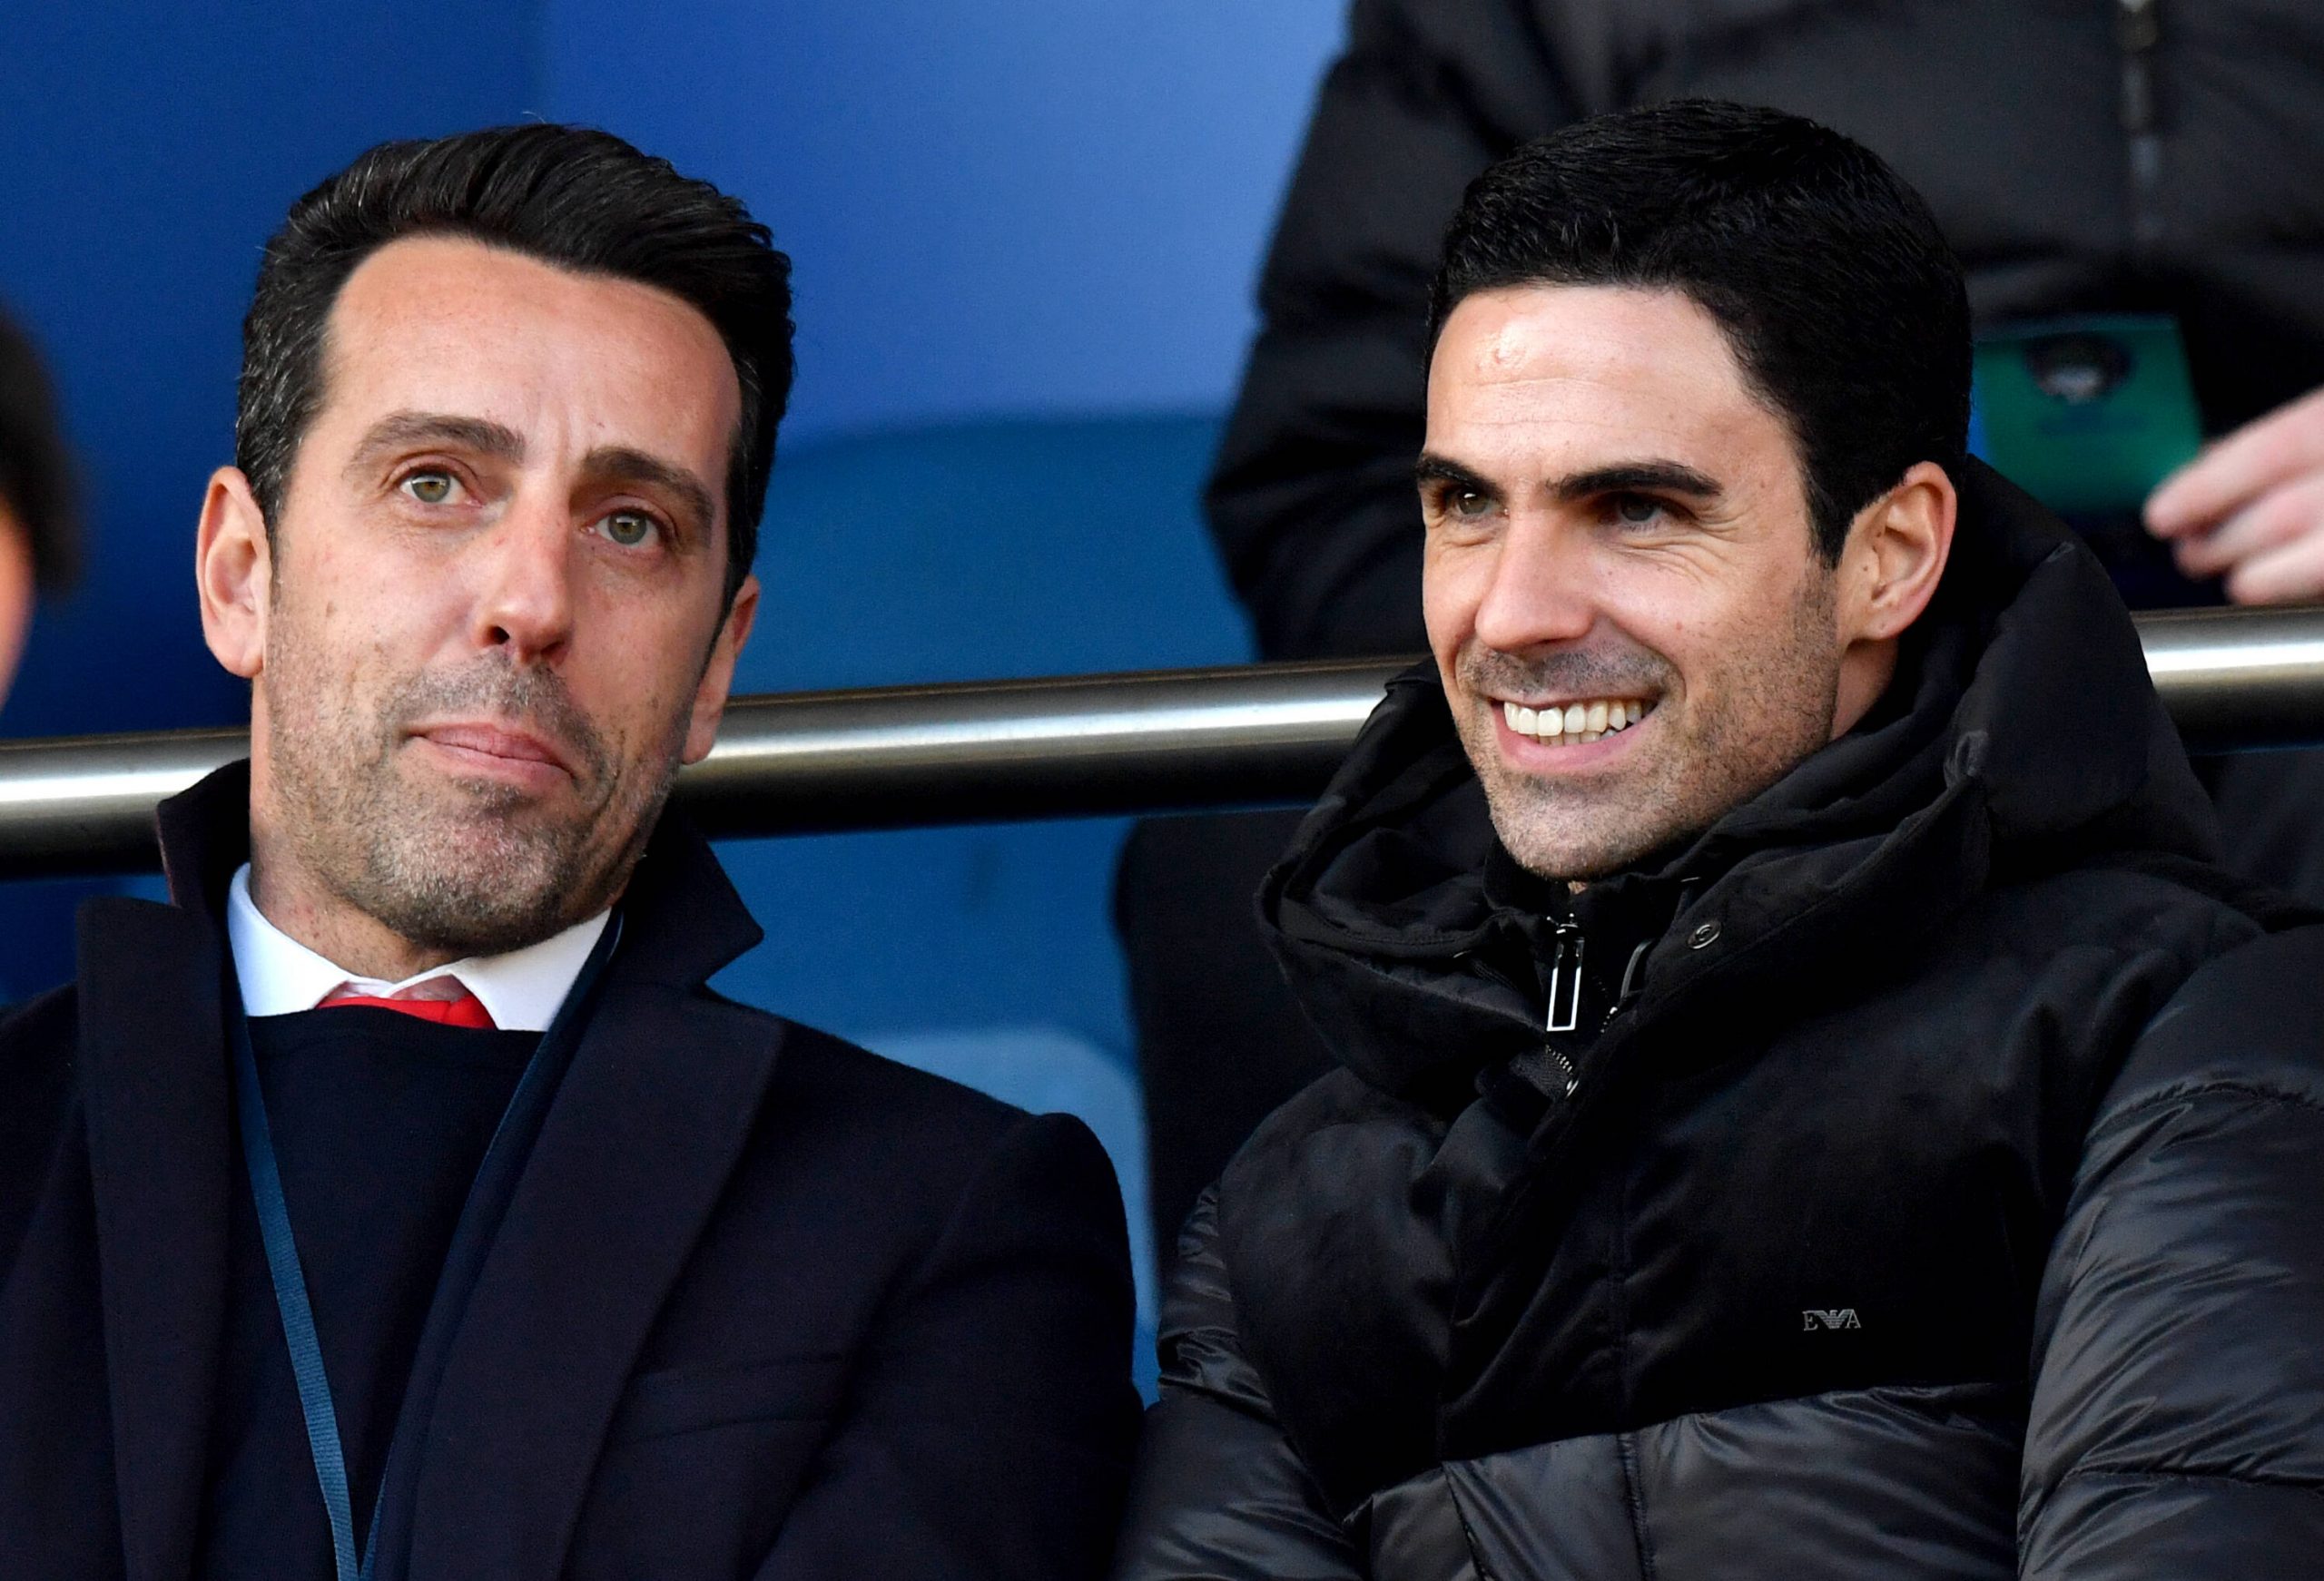 Edu File Photo File photo dated 21-12-2019 of Arsenal manager Mikel Arteta right and technical director Edu. Arsenal have promoted technical director Edu Gaspar into a new role as the clubs first-ever sporting director. Issue date: Friday November 18, 2022. FILE PHOTO EDITORIAL USE ONLY No use with unauthorised audio, video, data, fixture lists, club/league logos or live services. Online in-match use limited to 120 images, no video emulation. No use in betting, games or single club/league/player publica... PUBLICATIONxNOTxINxUKxIRL Copyright: xAnthonyxDevlinx 69832191